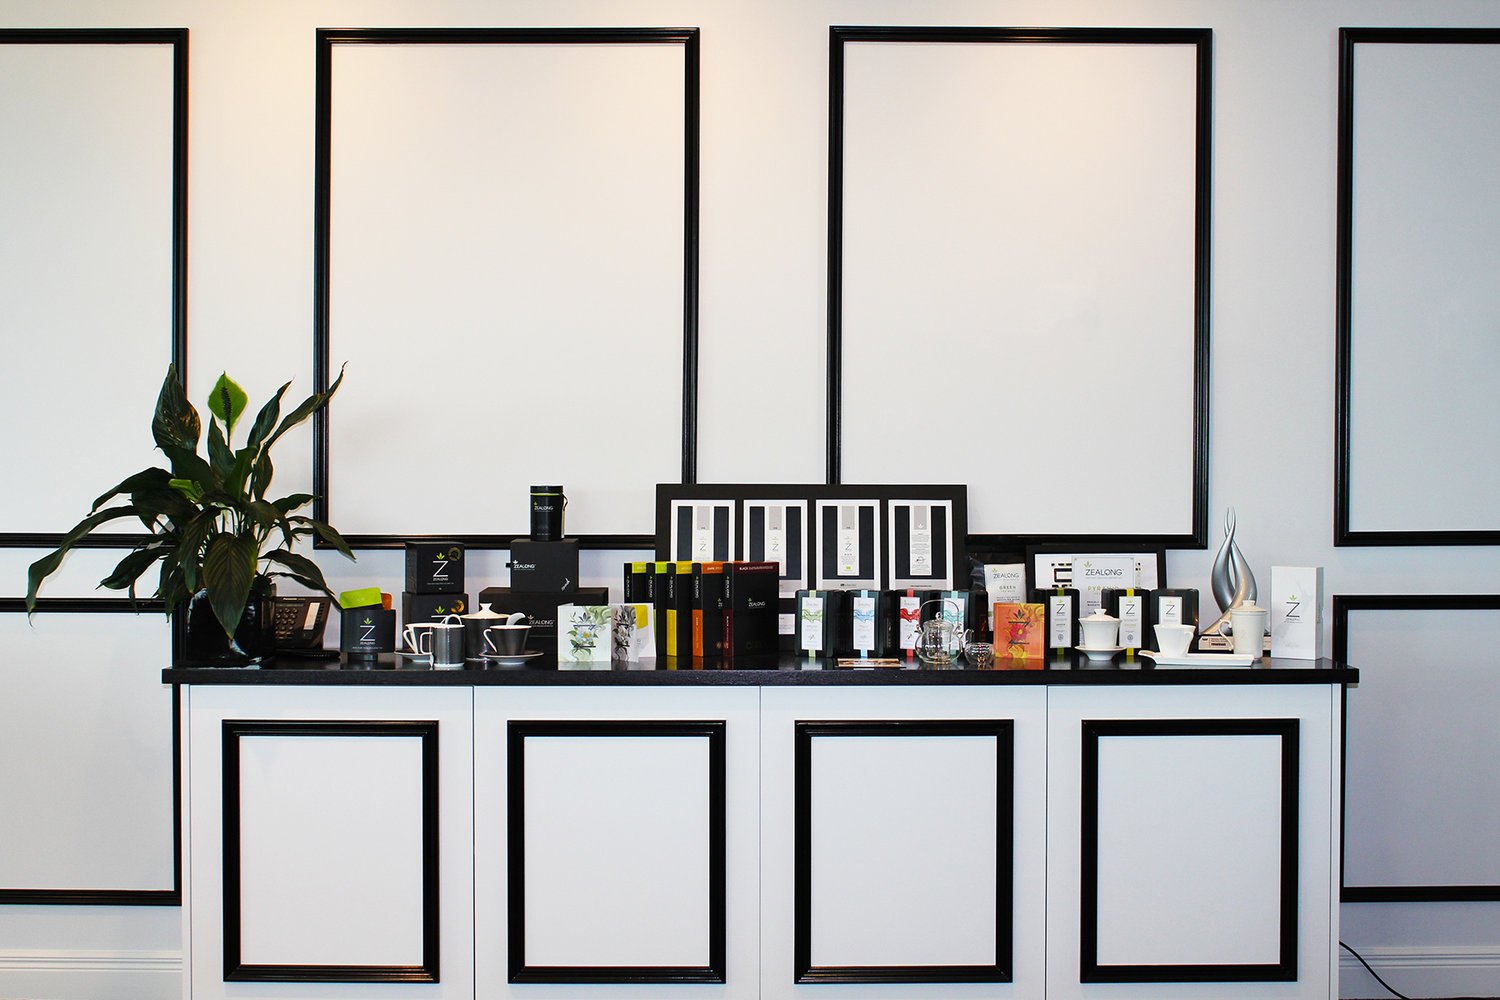 Zealong Tea Estate Retail store with their products displayed in front of a minimalistic black and white wall and cabinetry by Colourform Joinery